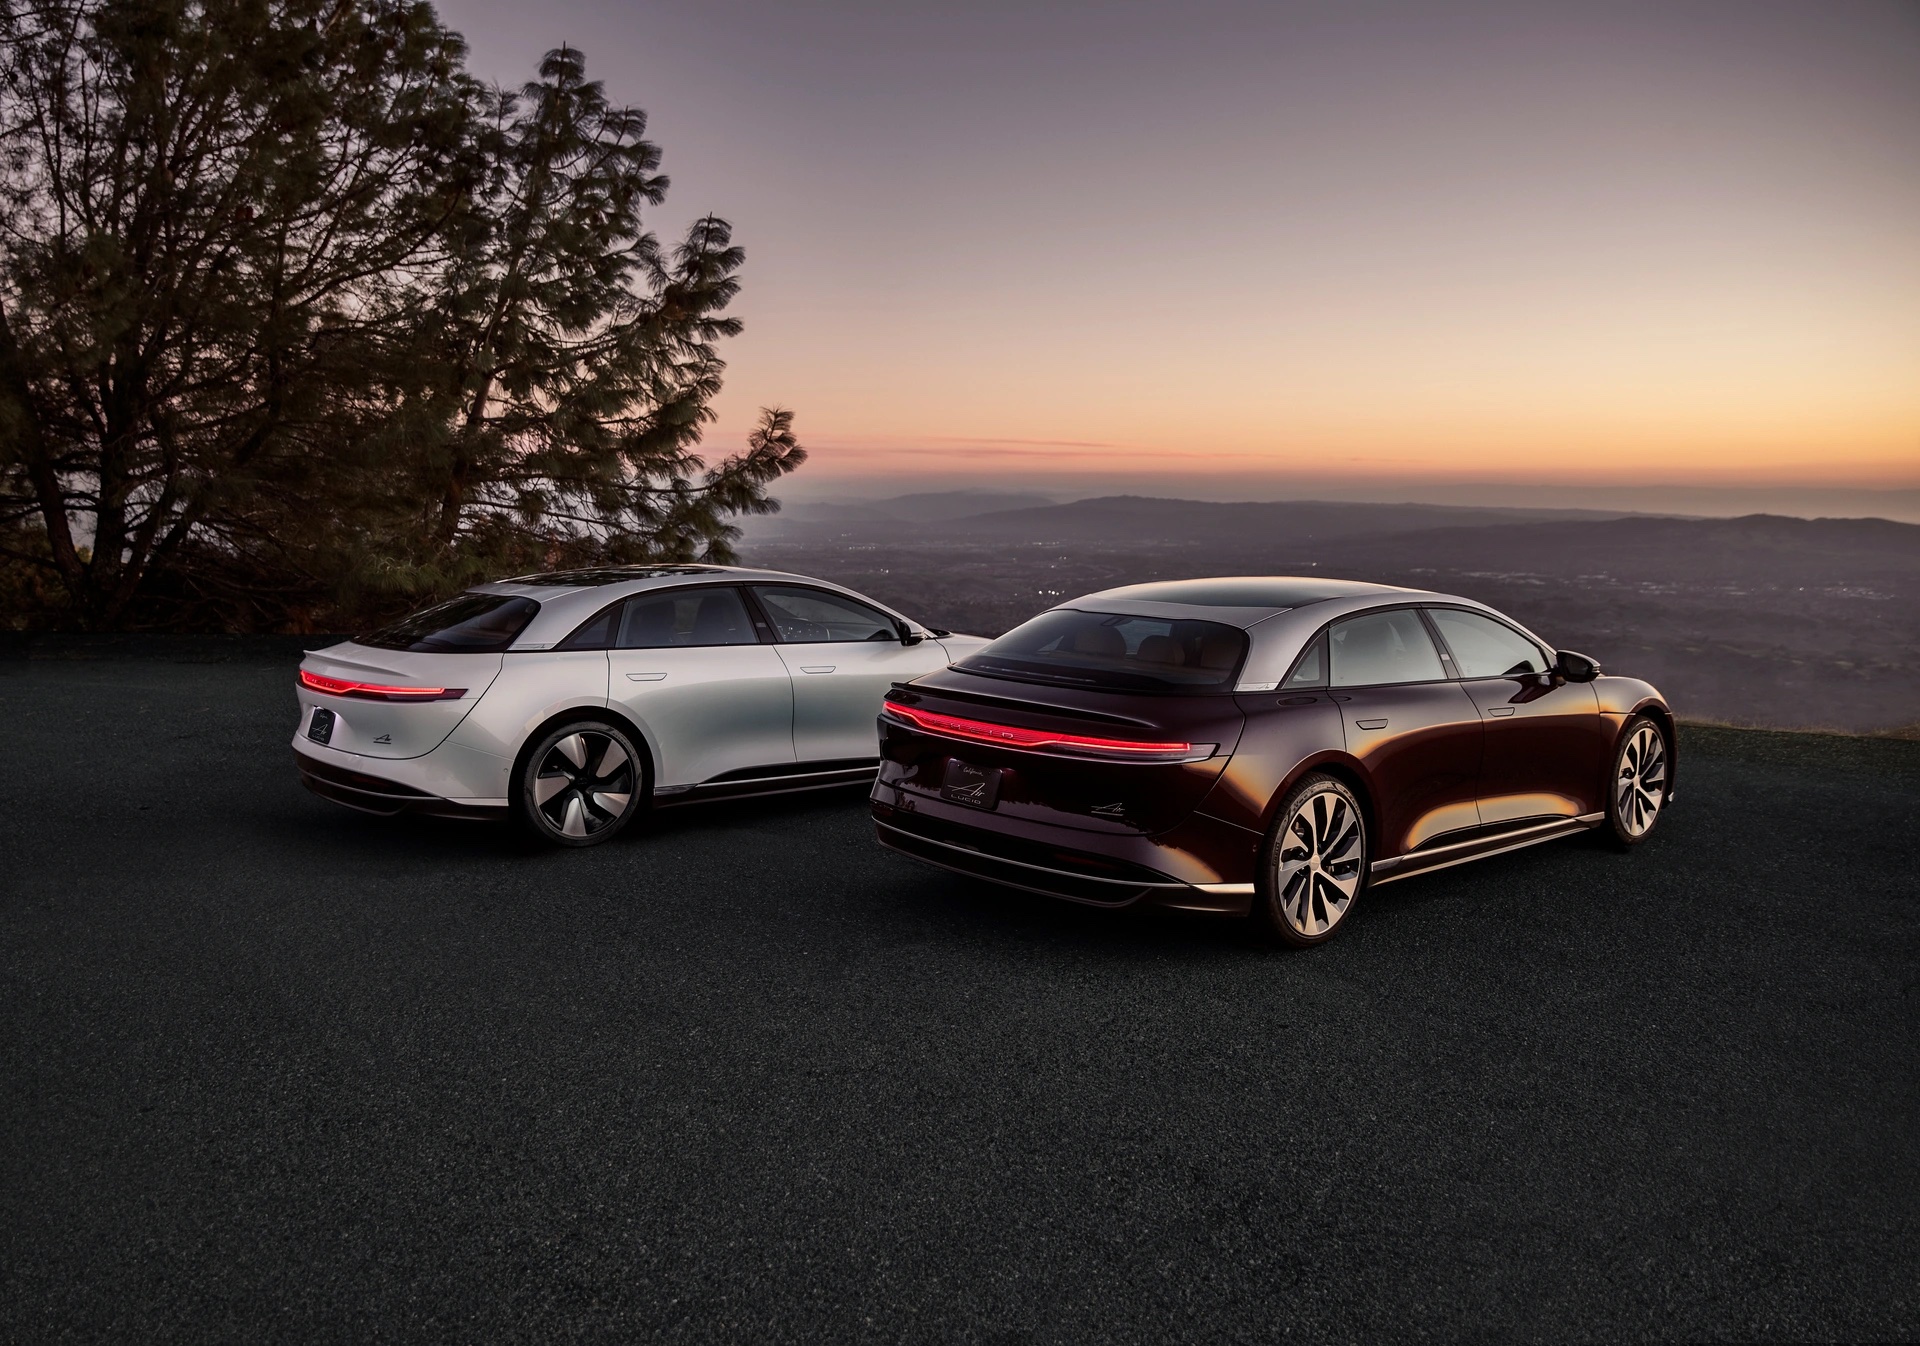 Lucid Motors Allowing Some Grand Touring Customers To Upgrade To Performance Model